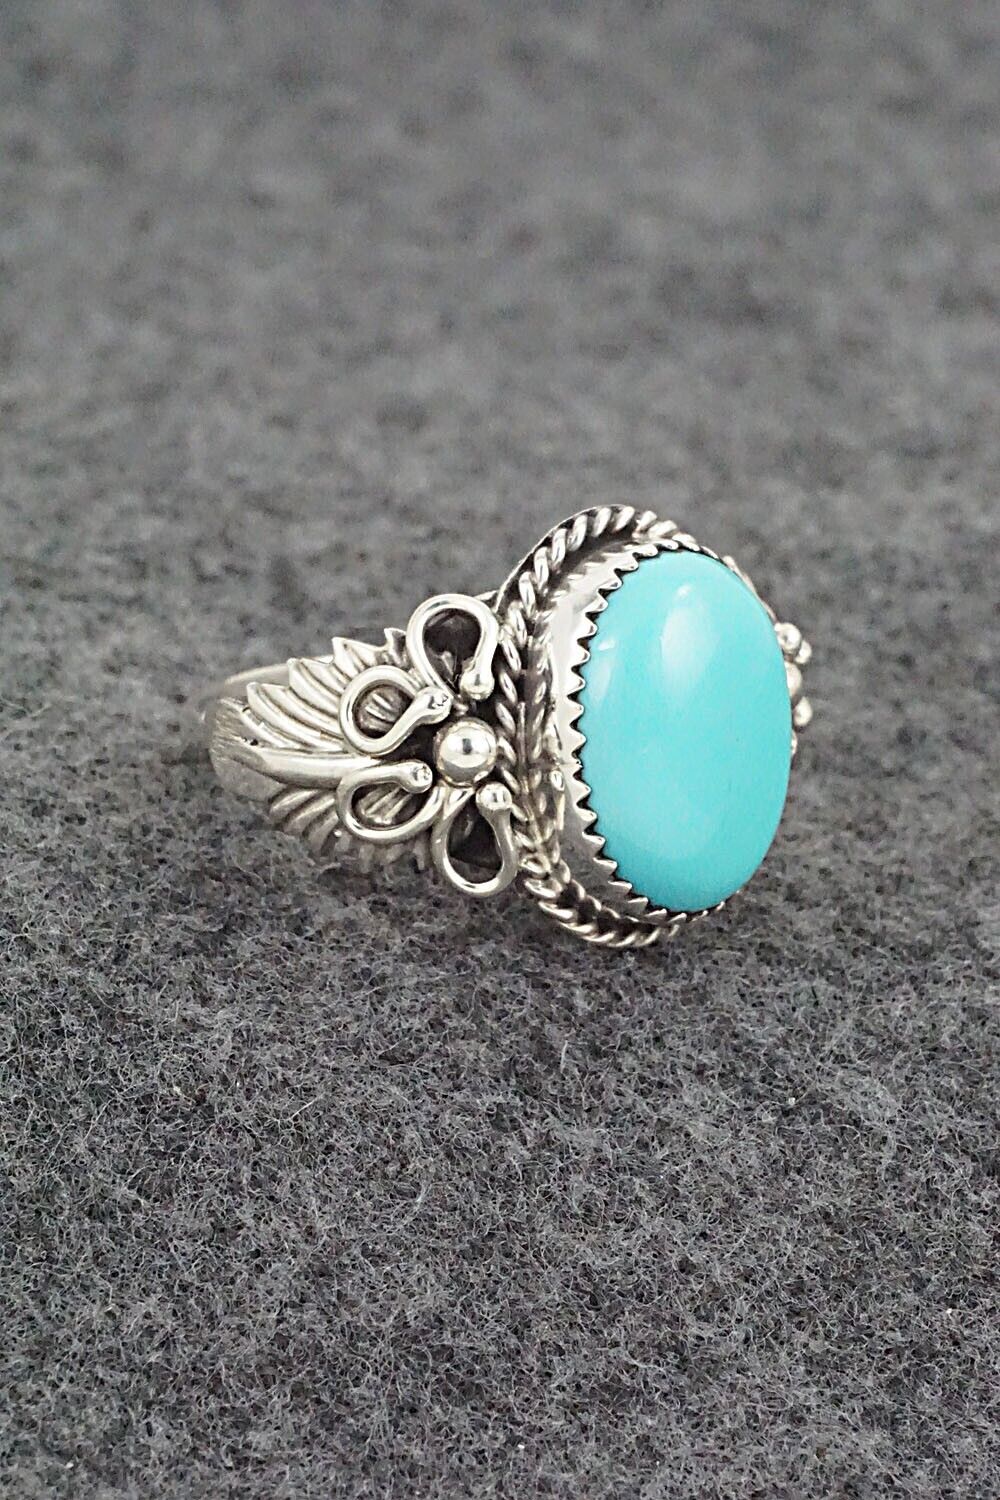 Turquoise & Sterling Silver Ring - Jeannette Saunders - Size 11.5